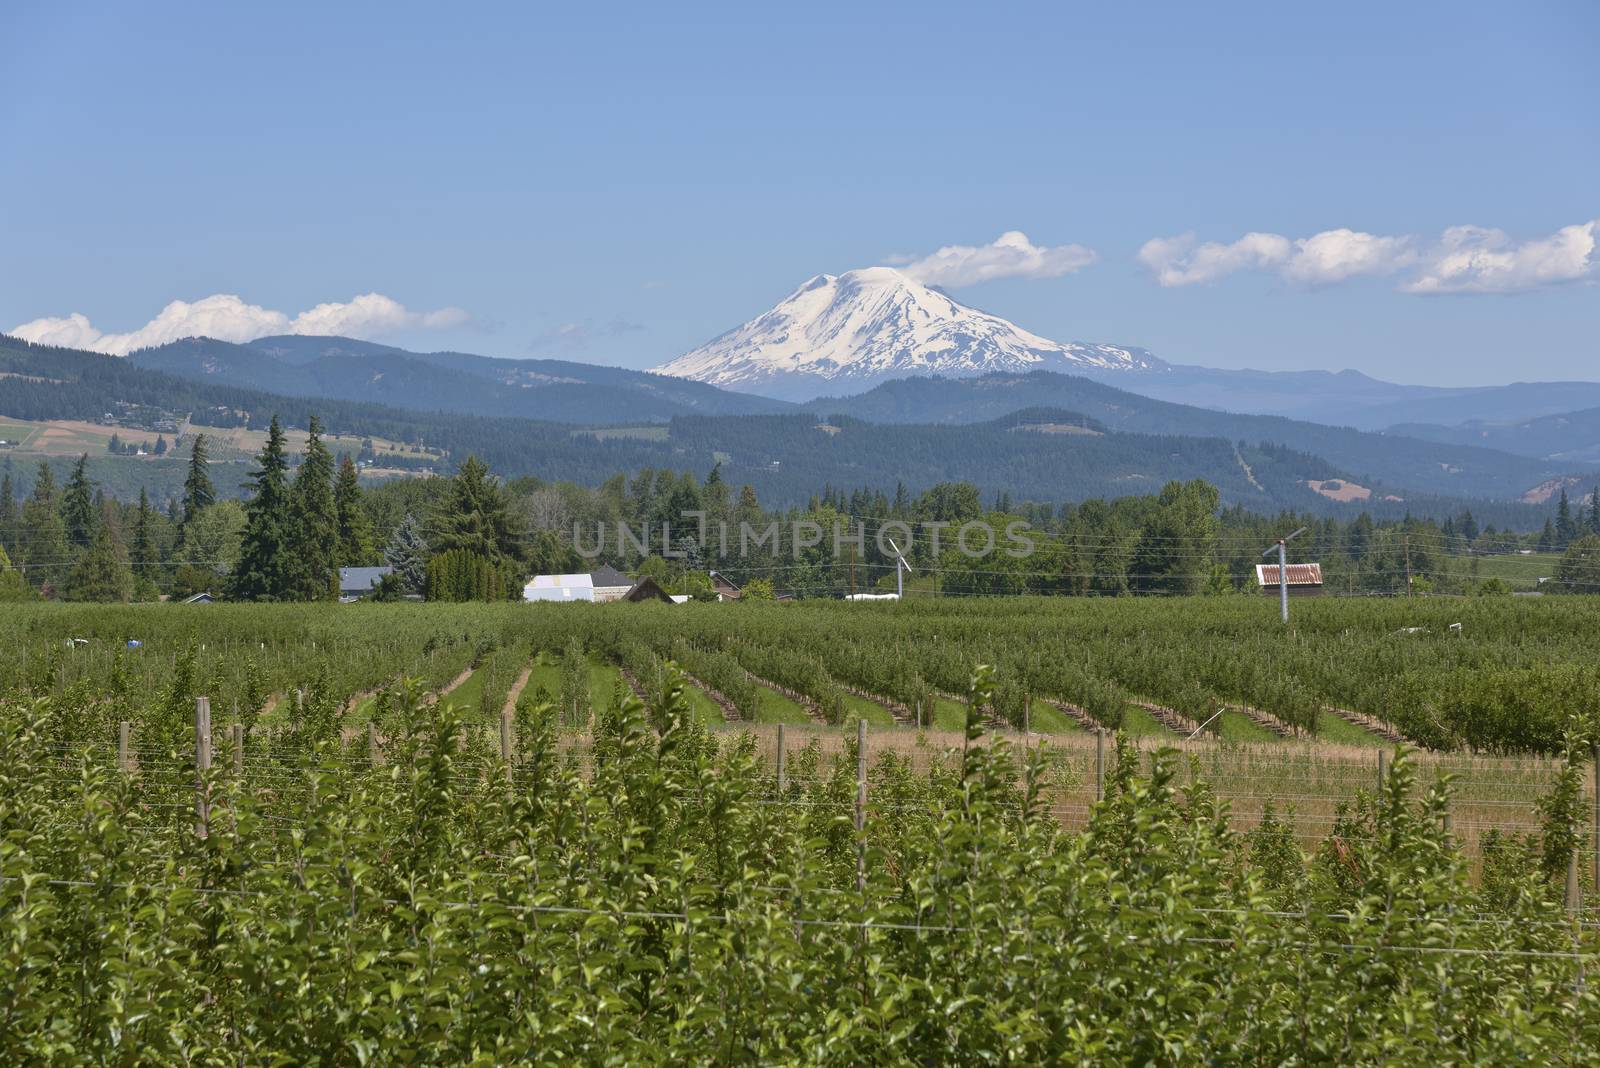 Mt Adams and the Hood River valley landscape Oregon.